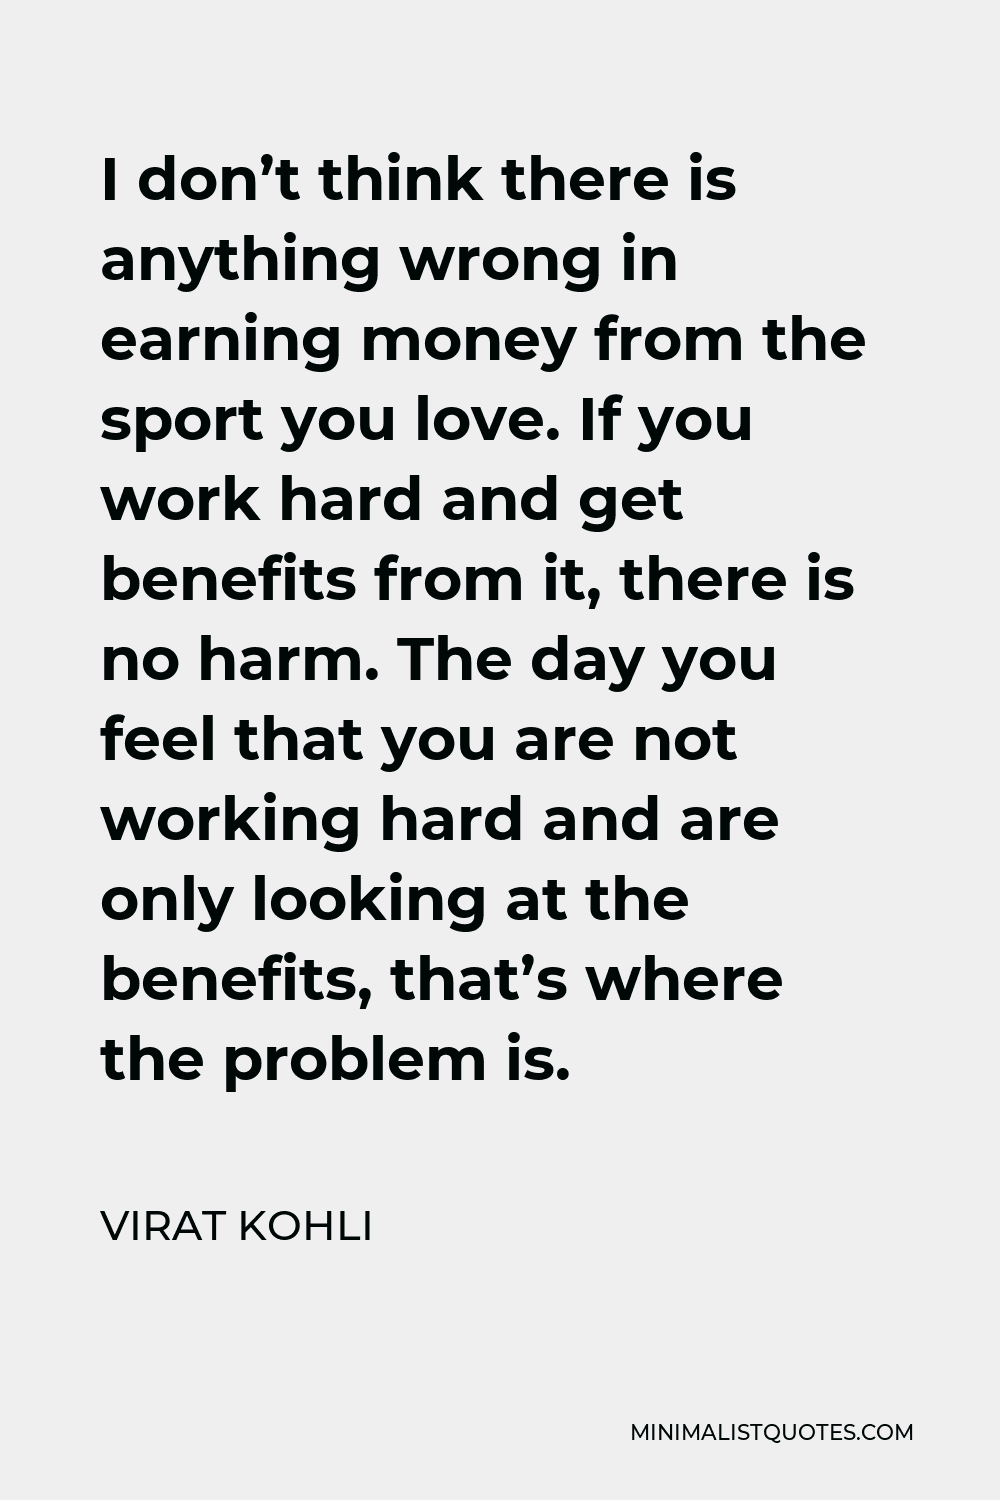 Virat Kohli Quote - I don’t think there is anything wrong in earning money from the sport you love. If you work hard and get benefits from it, there is no harm. The day you feel that you are not working hard and are only looking at the benefits, that’s where the problem is.